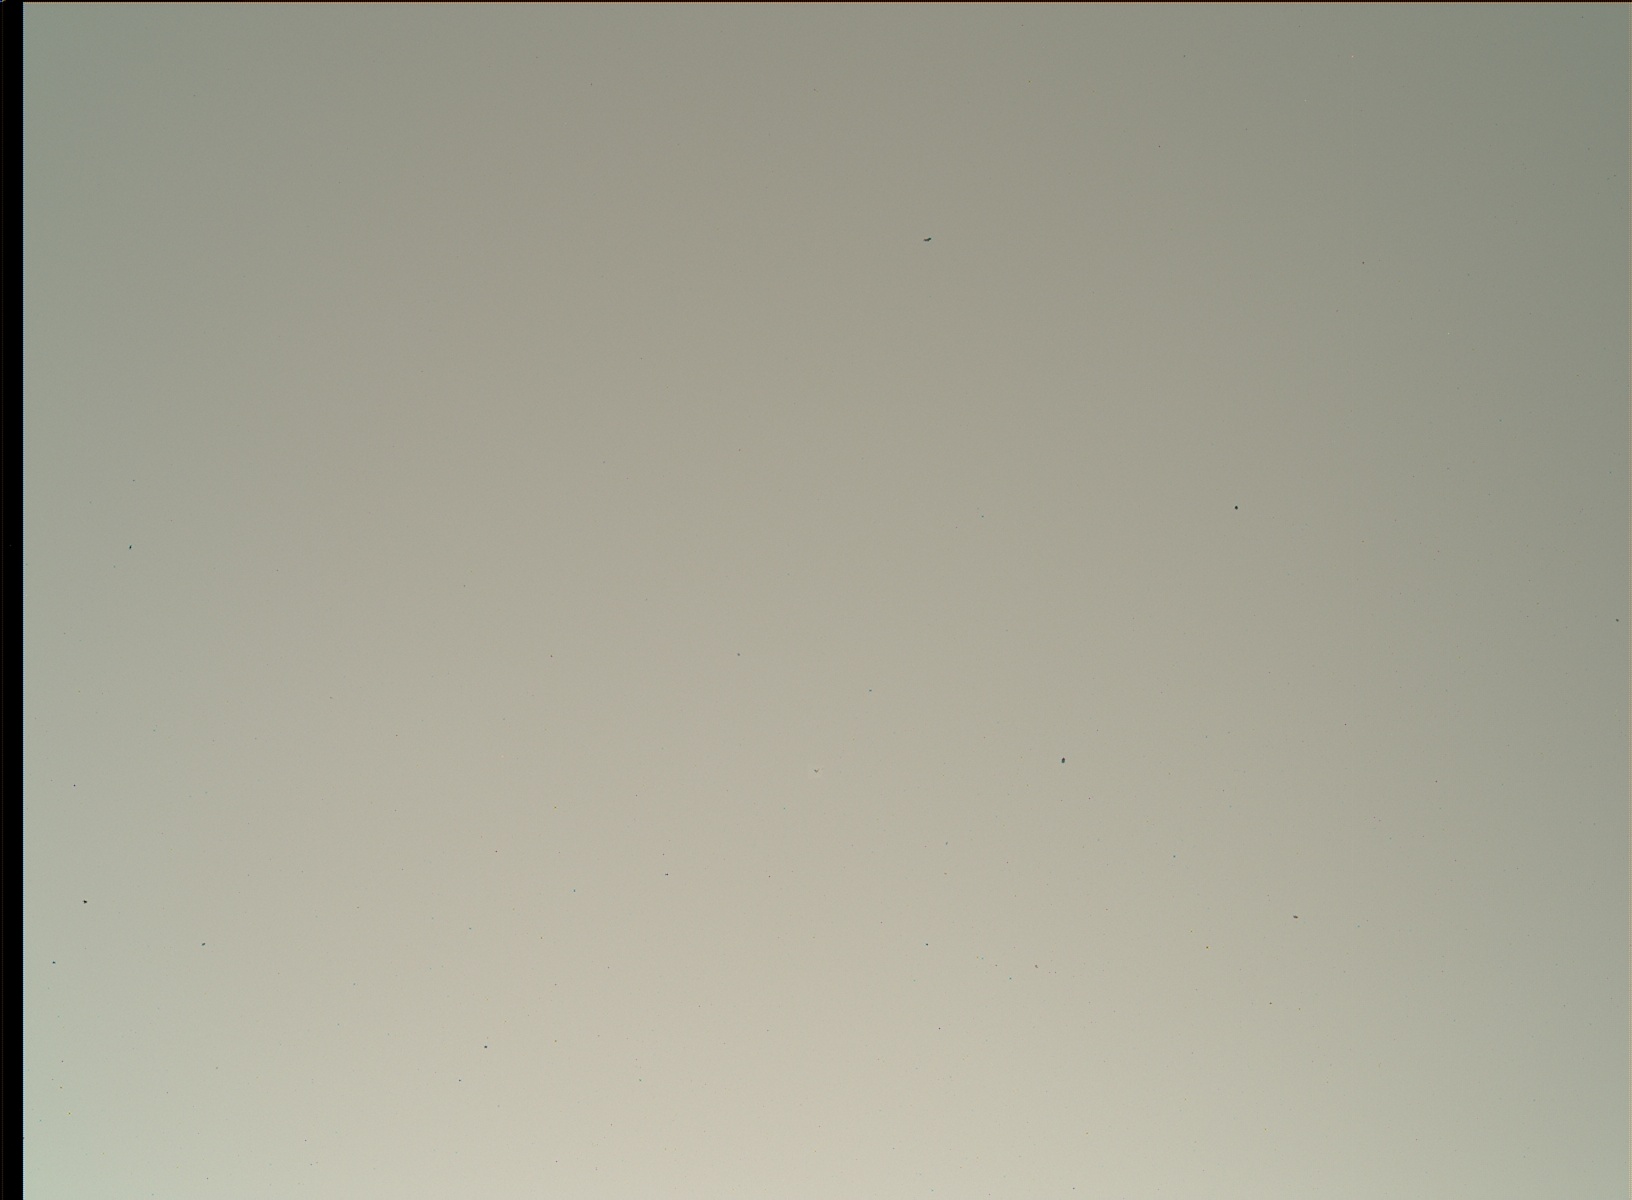 Nasa's Mars rover Curiosity acquired this image using its Mars Hand Lens Imager (MAHLI) on Sol 1157